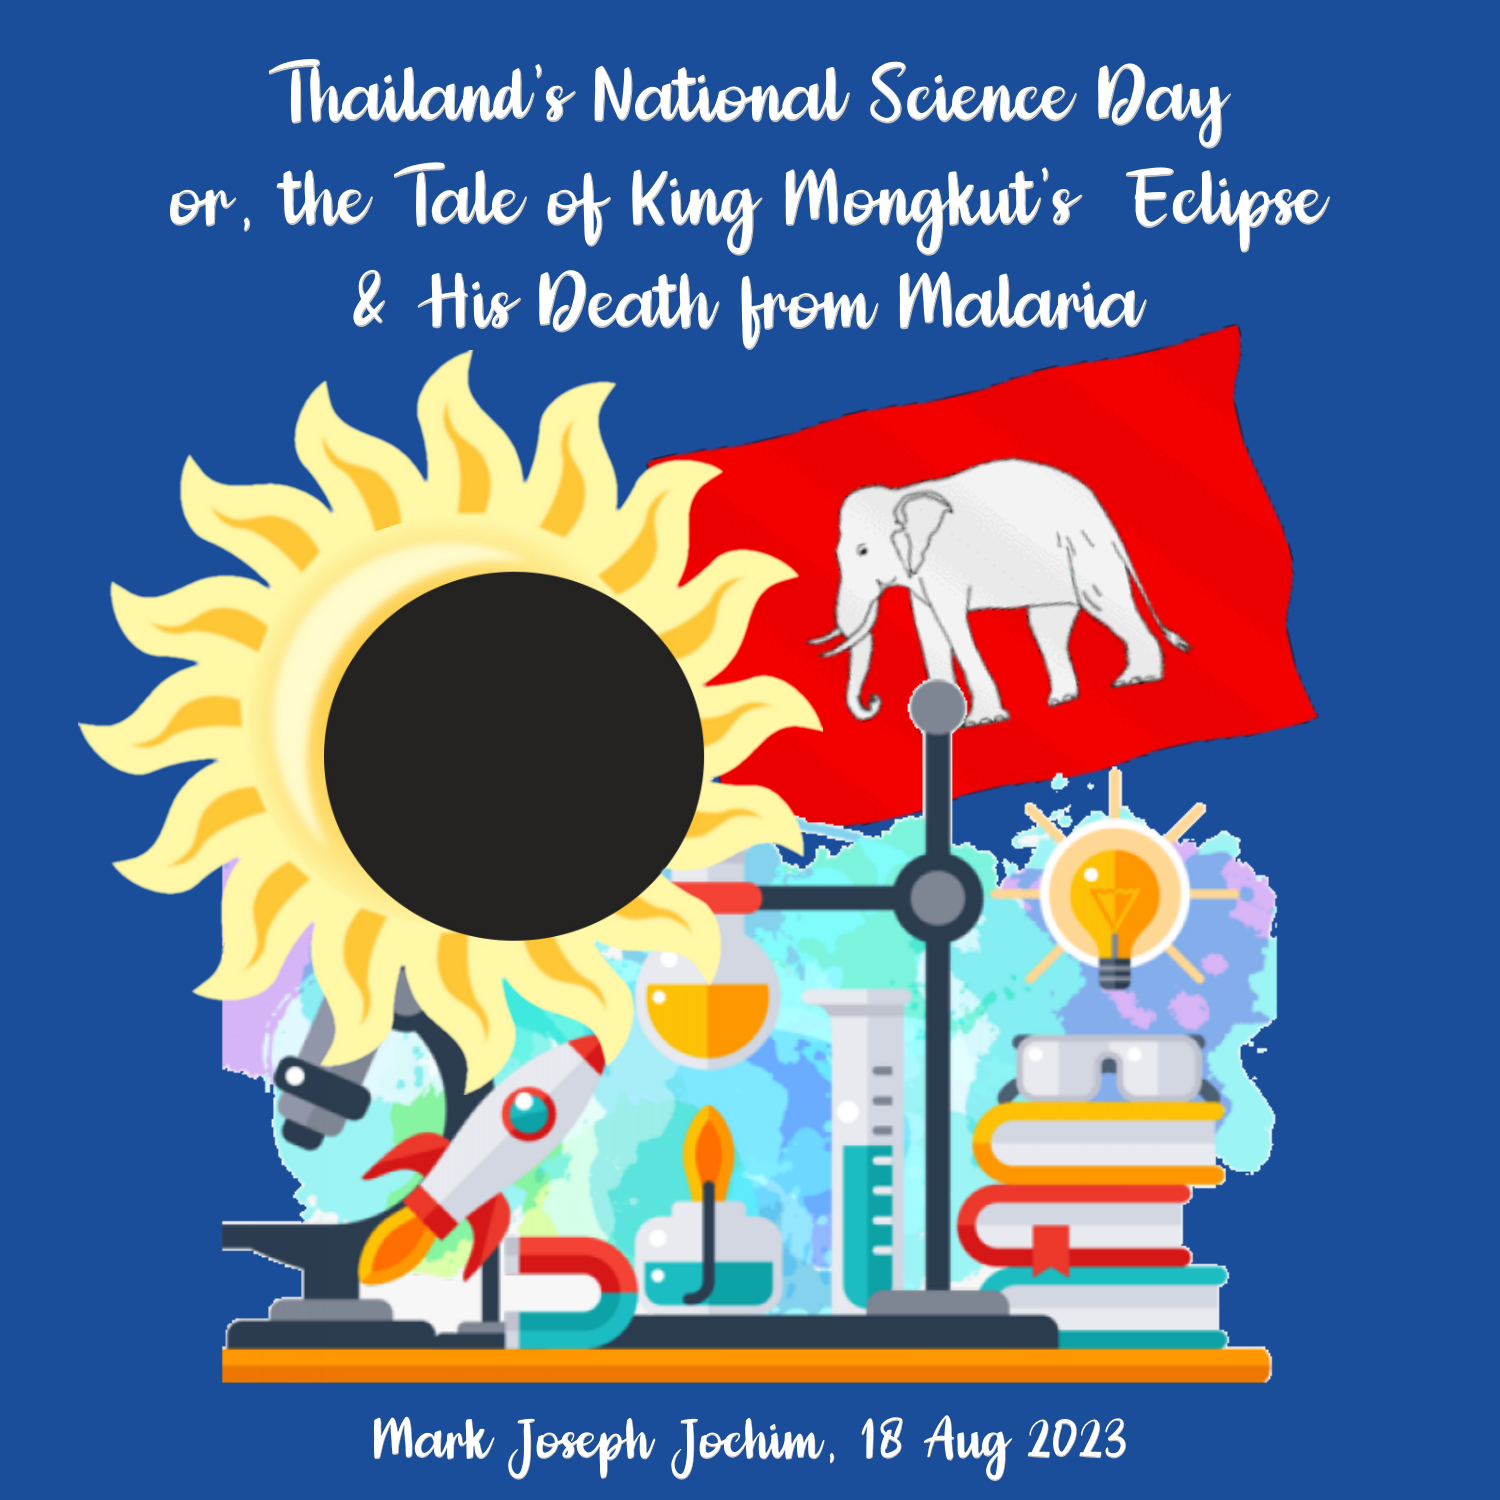 Thailand’s National Science Day or, the Tale of King Mongkut’s Eclipse ...